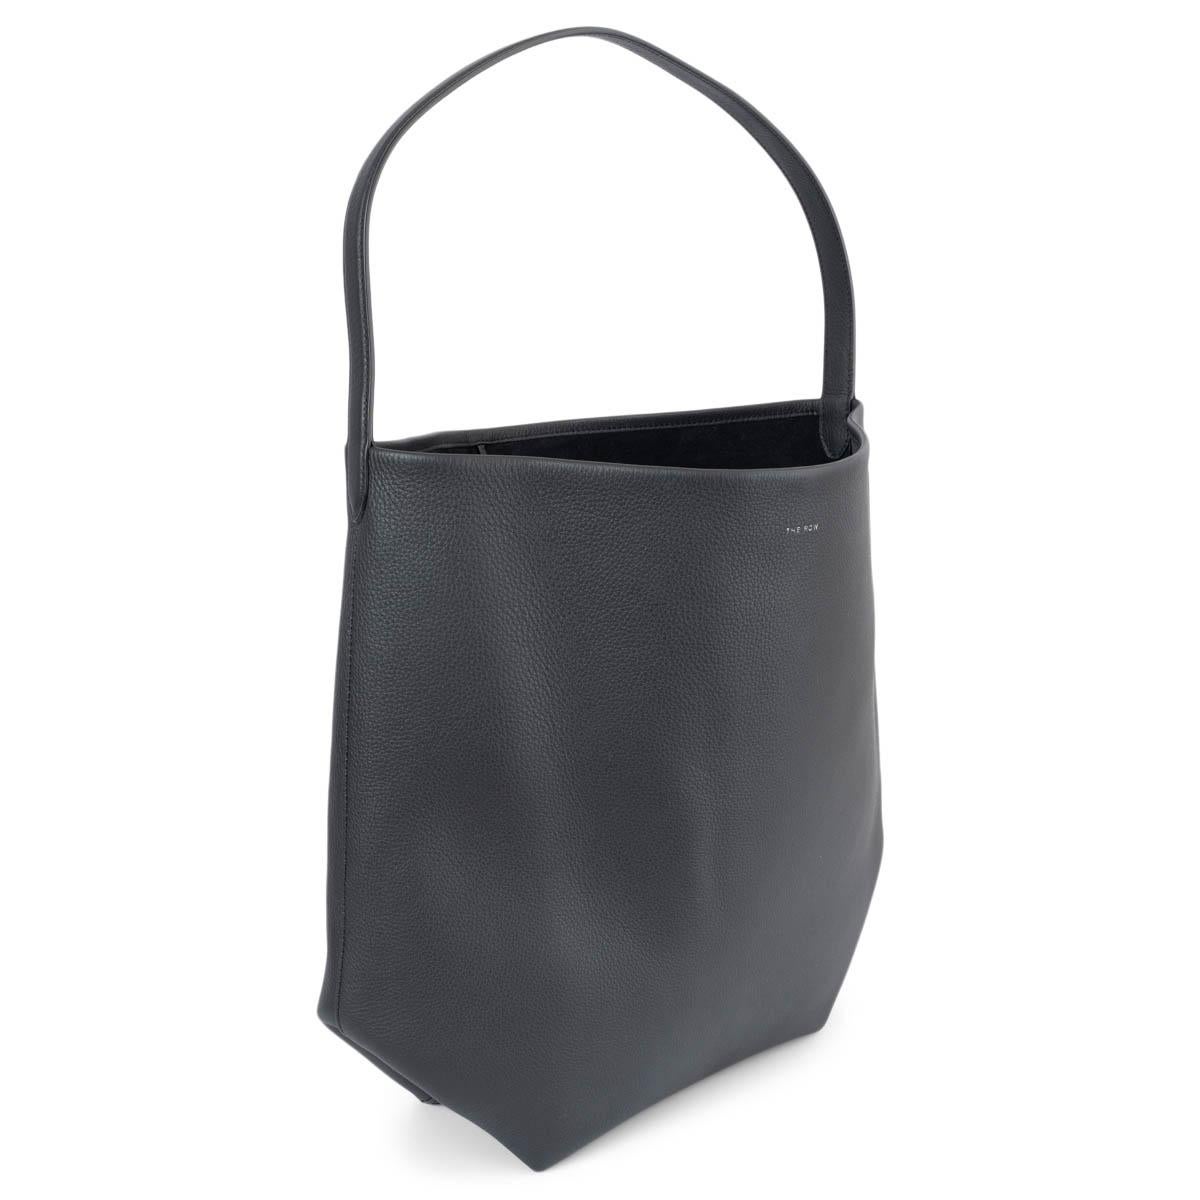 100% authentic The Row N/S Park Tote Hobo bag in pebbled black leather. Lined in supple suede and finished with a single slender strap. Closes with a string on top. Has been carried once or twice and is in virtually new condition.